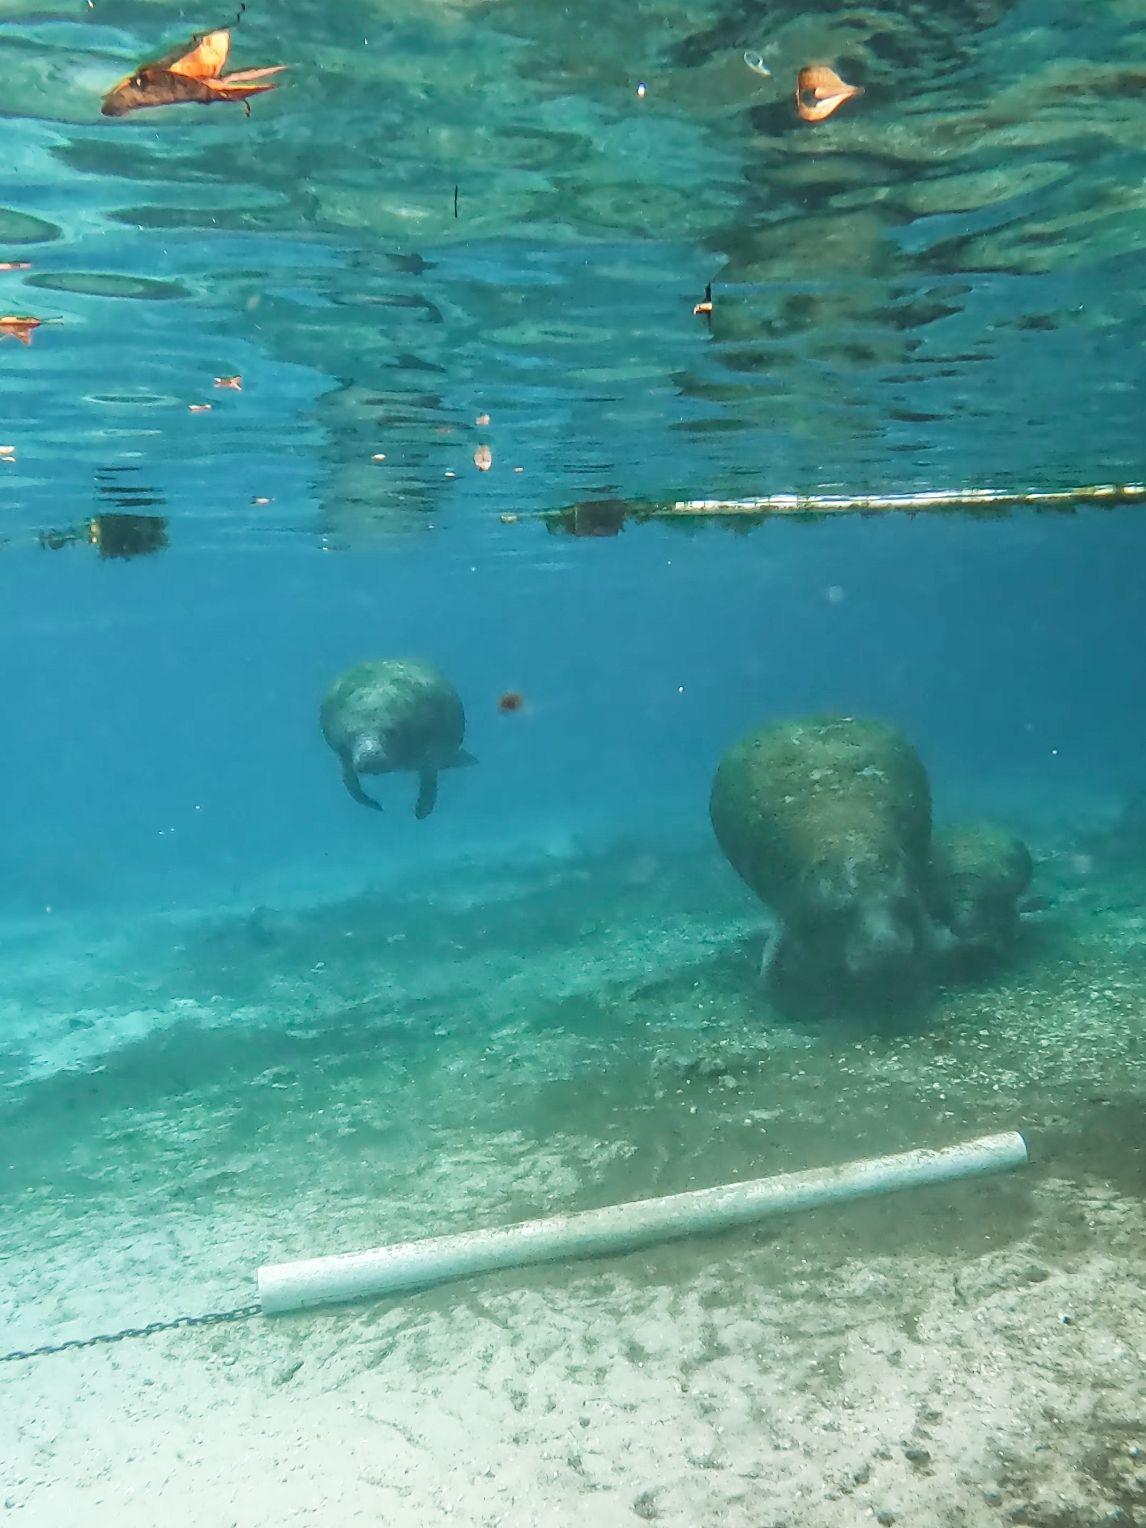 A mother manatee with two babies nearby swimming below the surface.